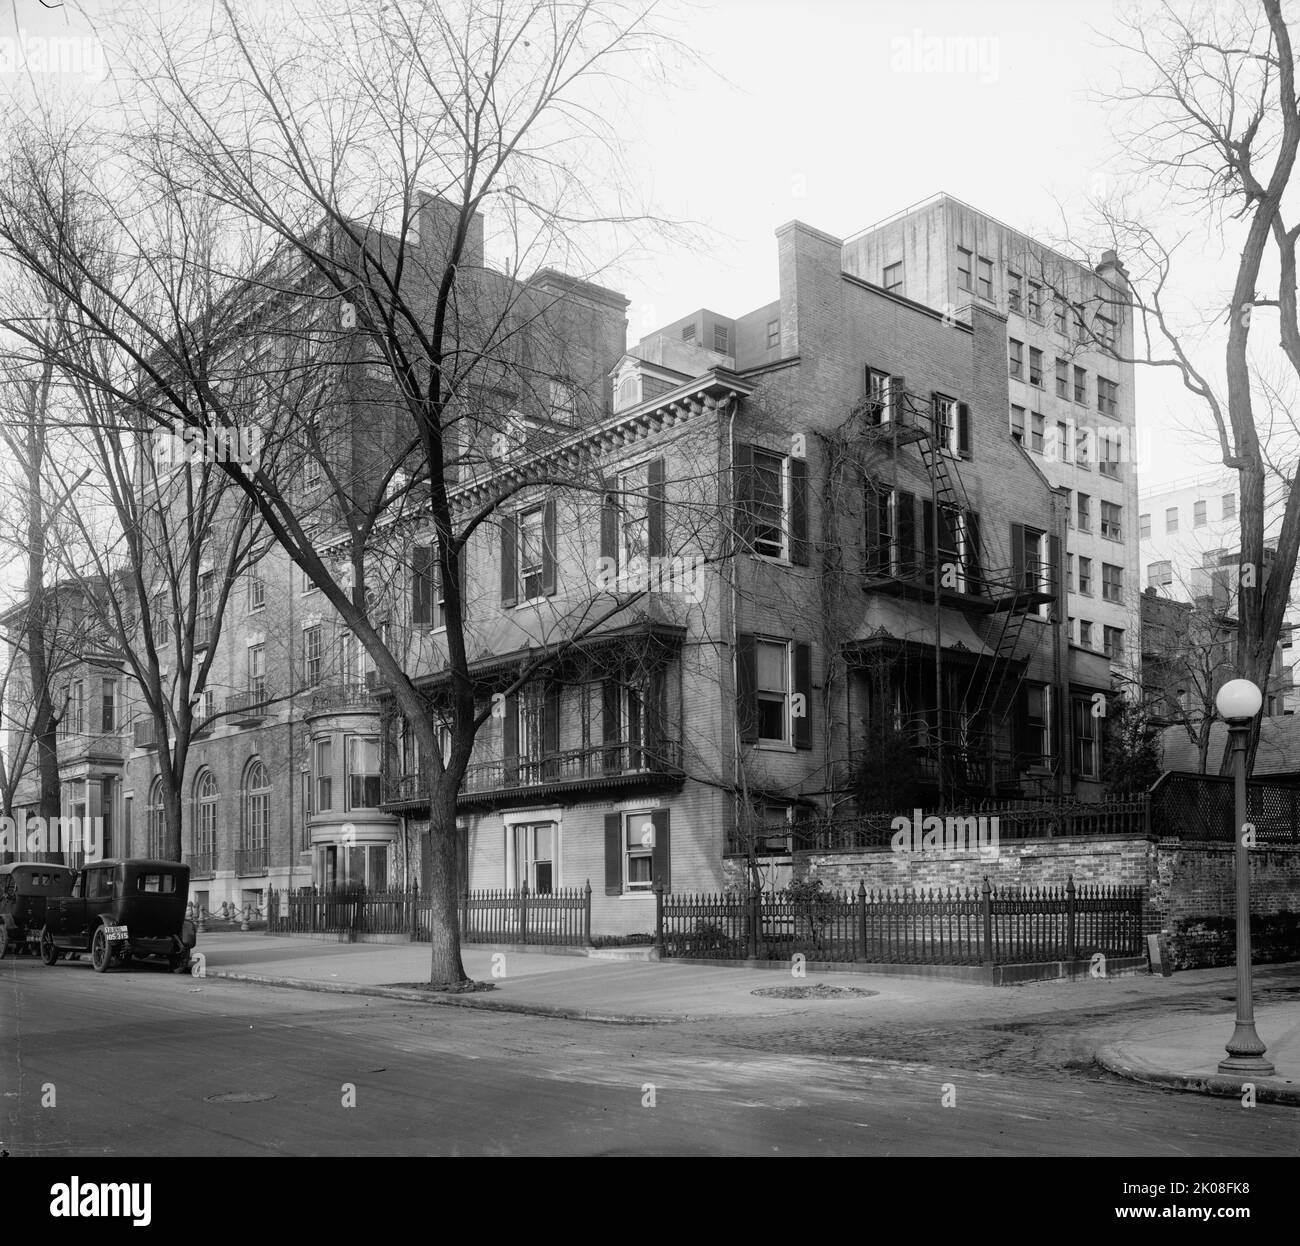 Cameron House, between 1910 and 1920. [Cameron House in Washington, DC, the offices of the Congressional Union for Woman Suffrage. Women in the United States gained the legal right to vote in 1920, with the passing of the 19th Amendment]. Stock Photo